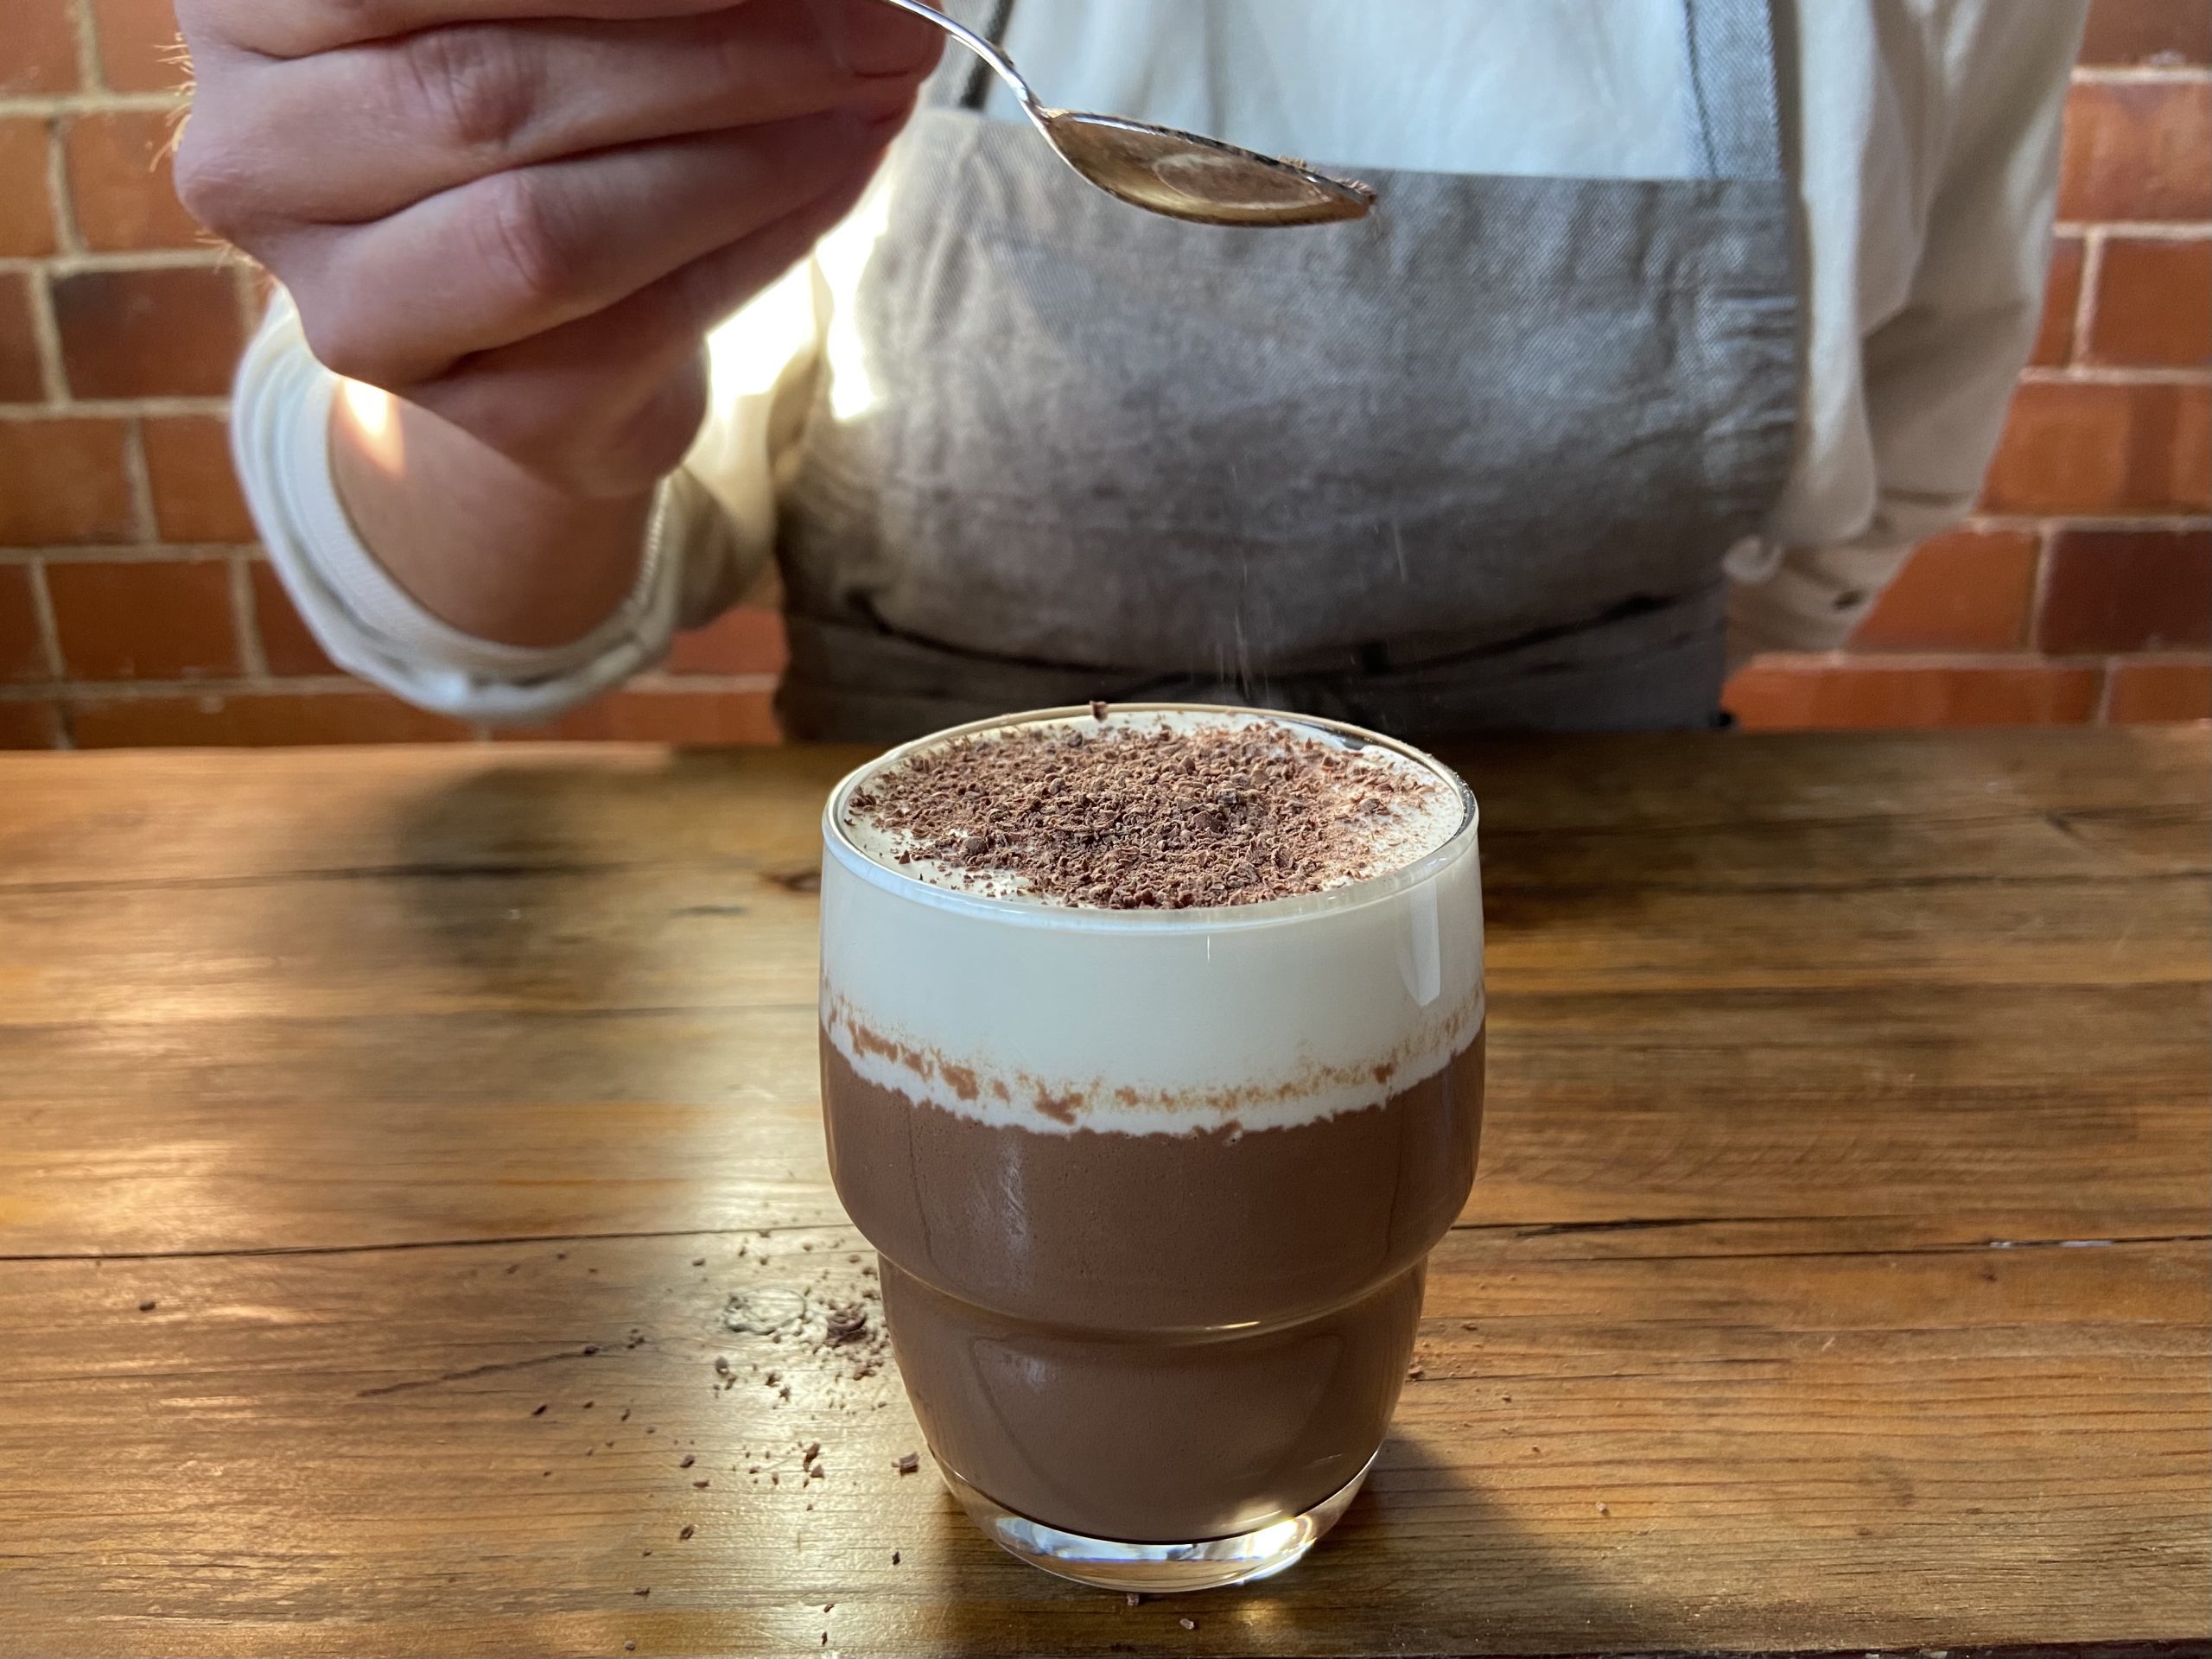 We are going to share our drinking chocolate home recipes. One of them is prepared directly in the cup. The other allows us to prepare a bigger batch of hot chocolate.